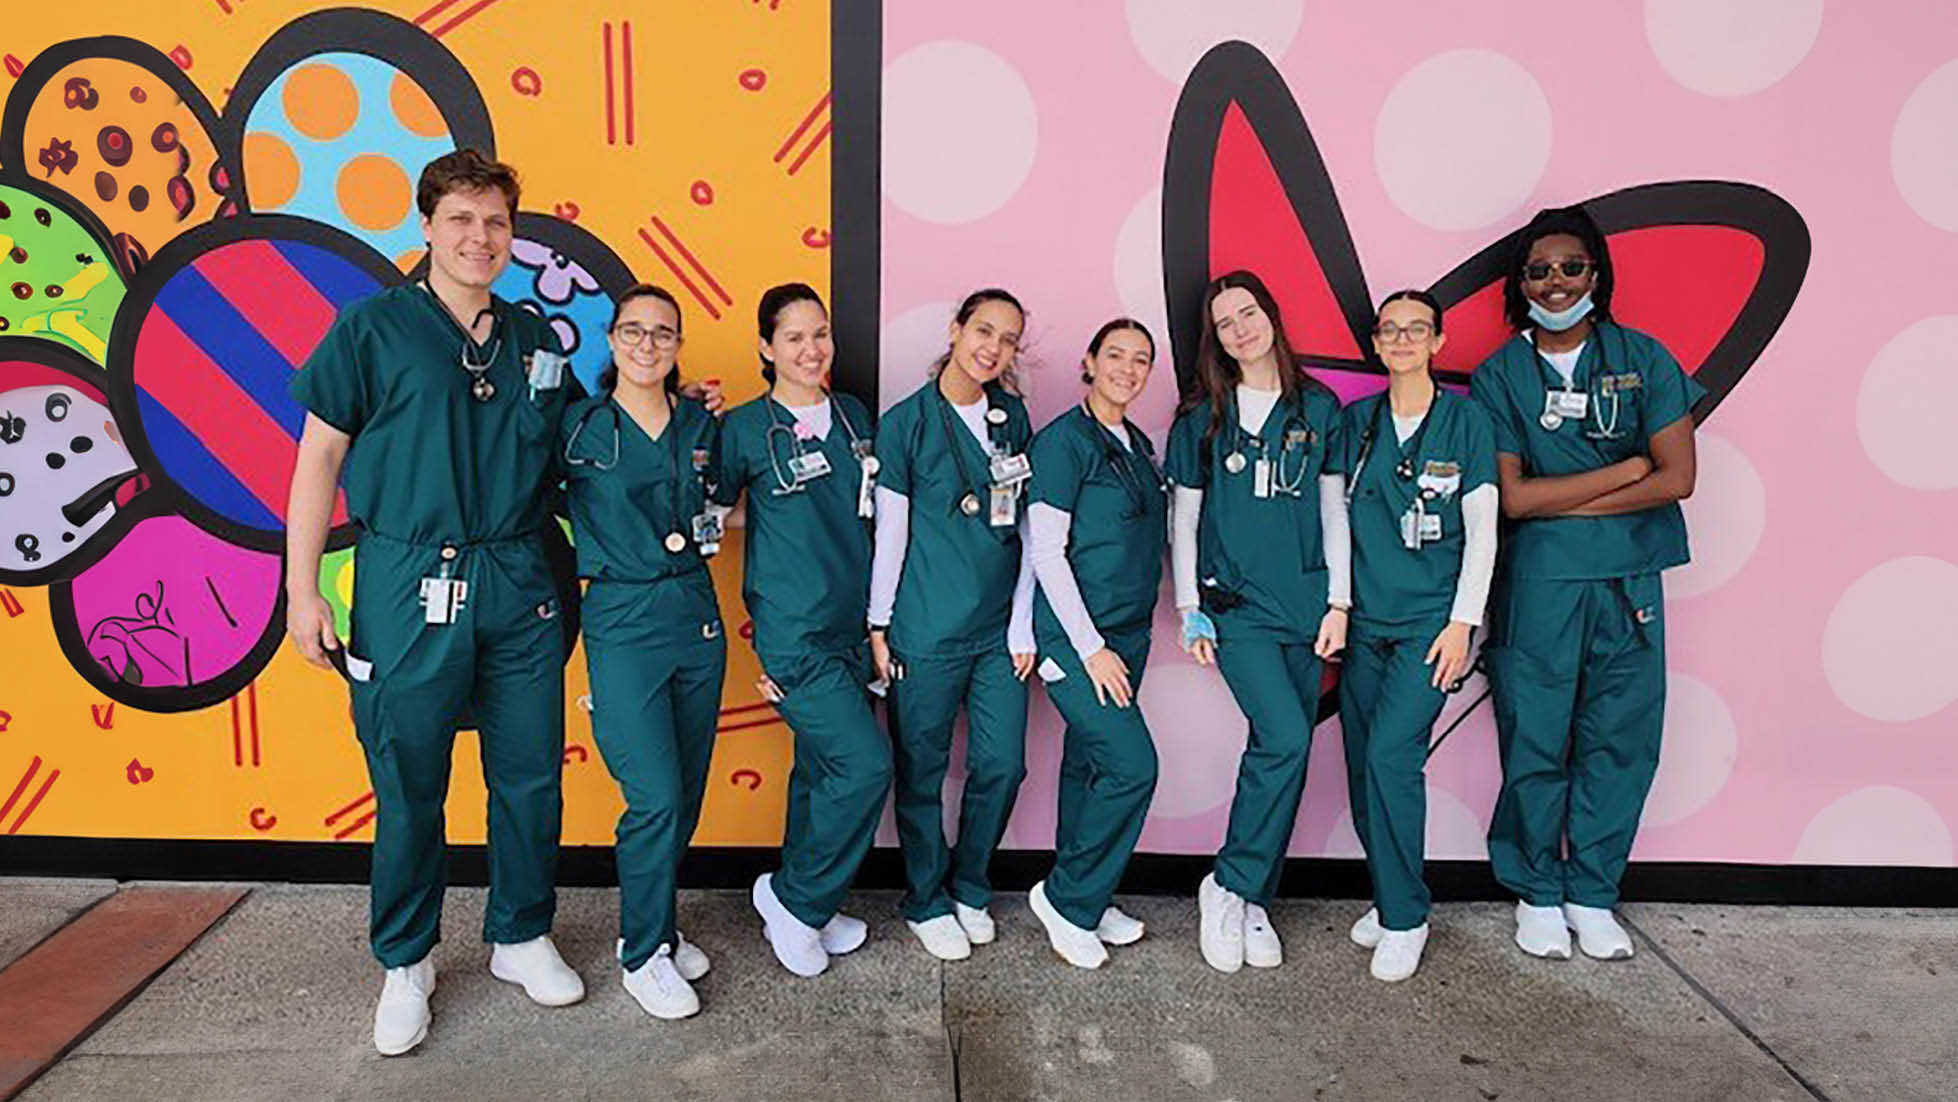 University of Miami School of Nursing and Health Studies (SONHS) Awarded Florida Department of Education "Linking Industry to Nursing Education" Grant for Second Year